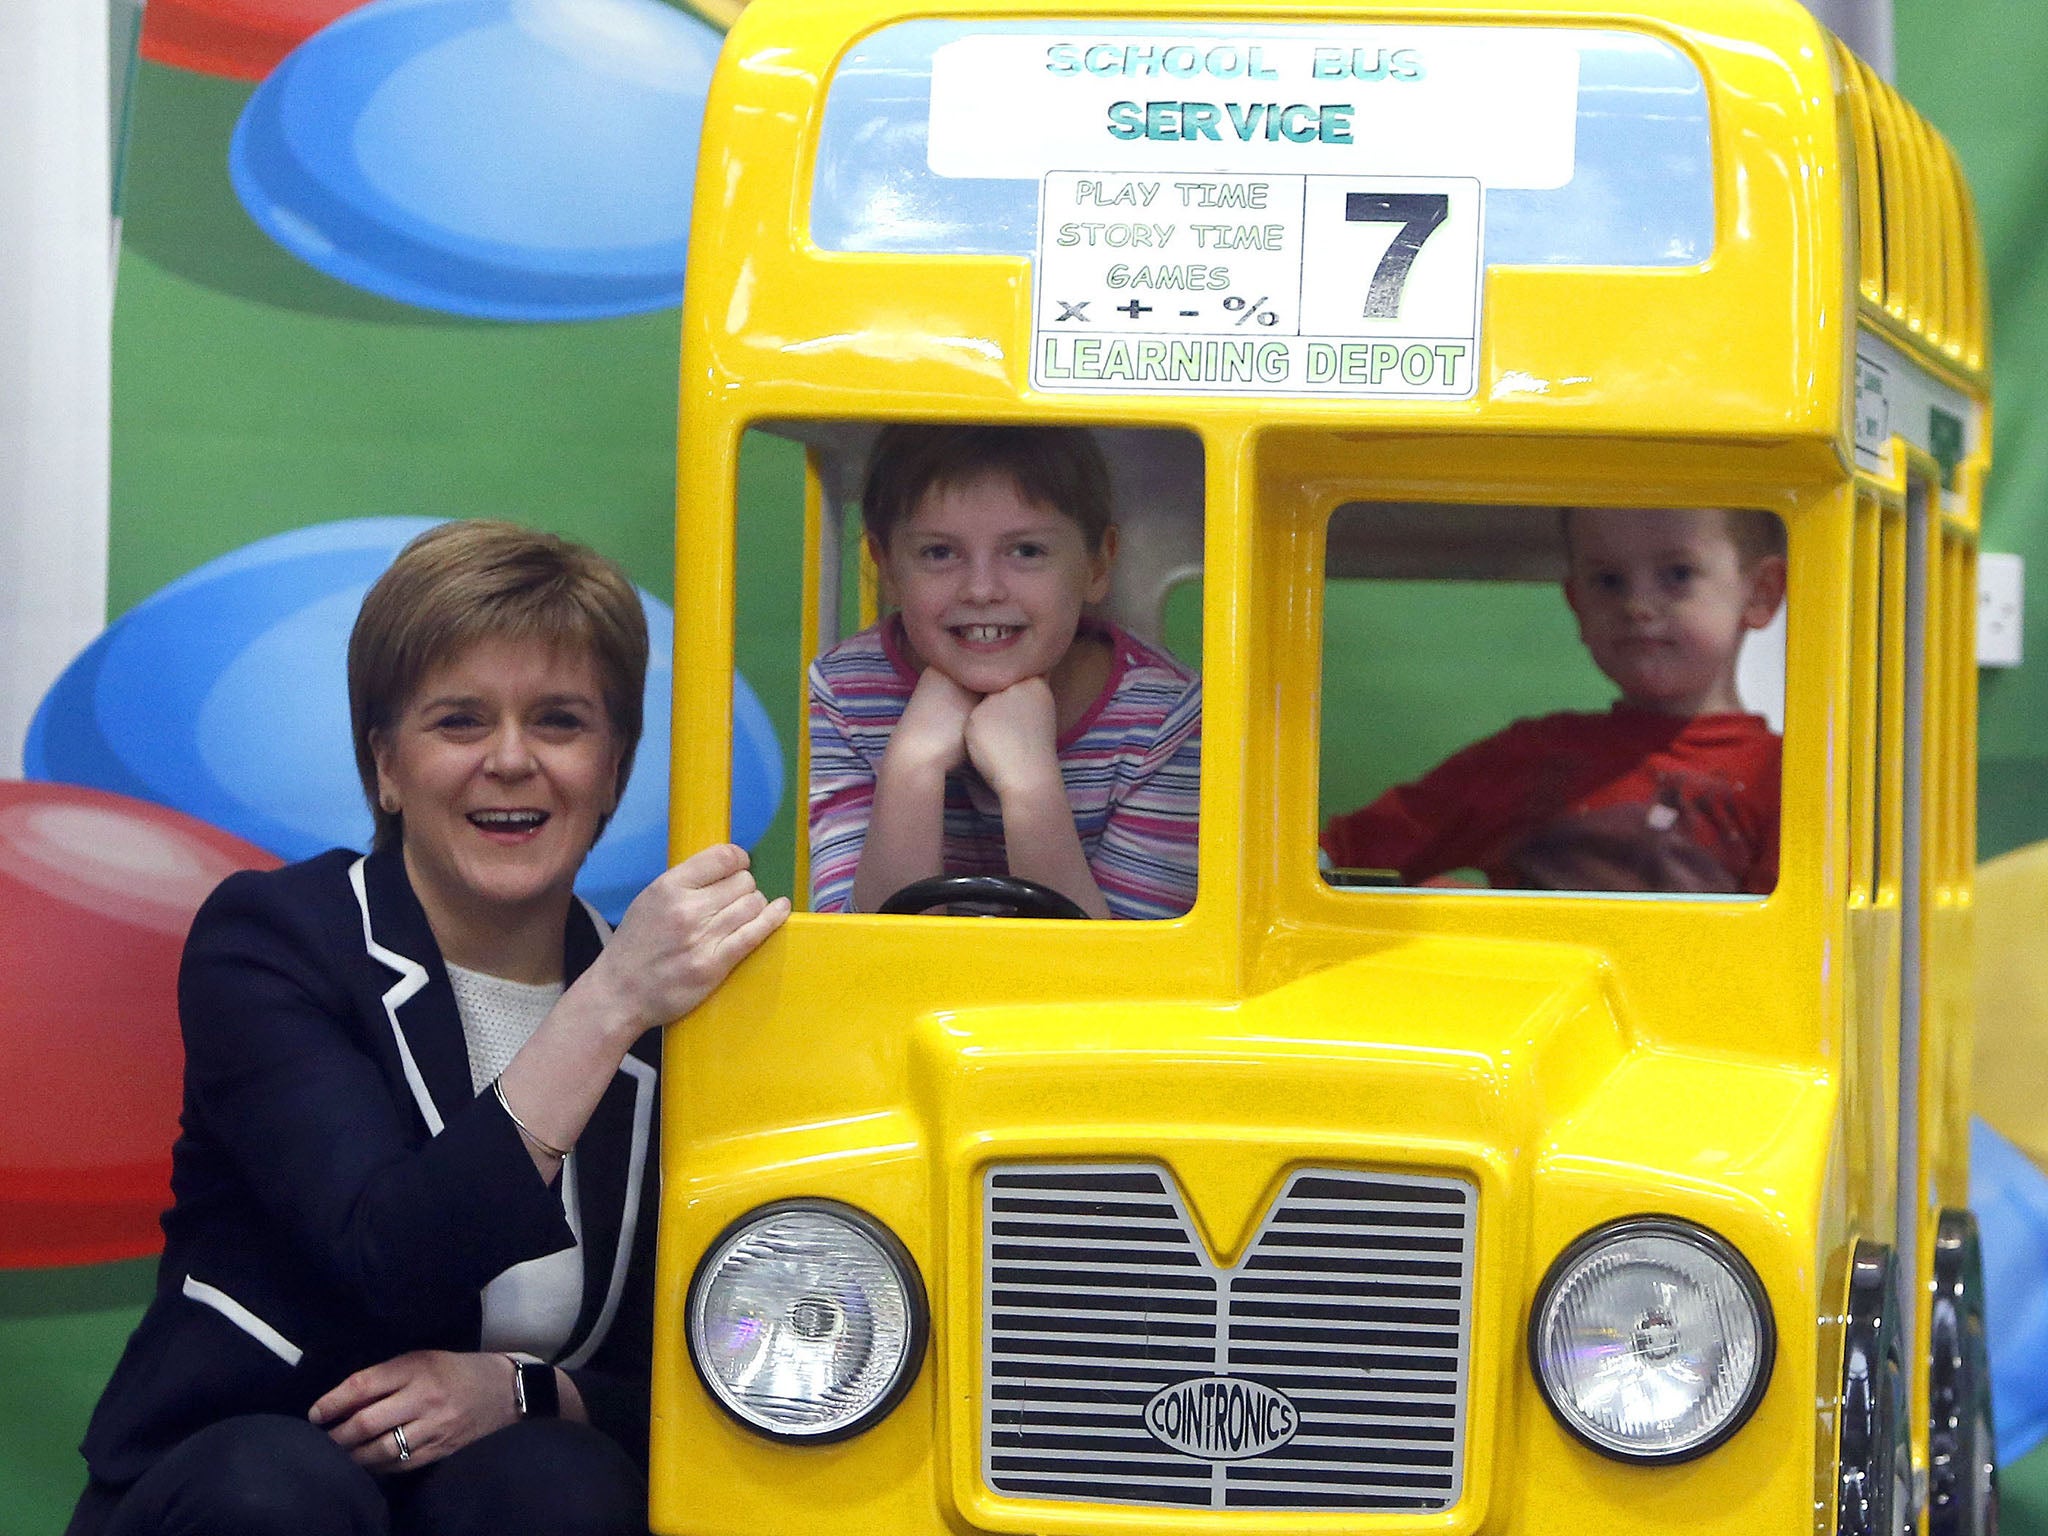 First Minister Nicola Sturgeon meets children during a visit to Lollipop Land soft play centre in Glasgow